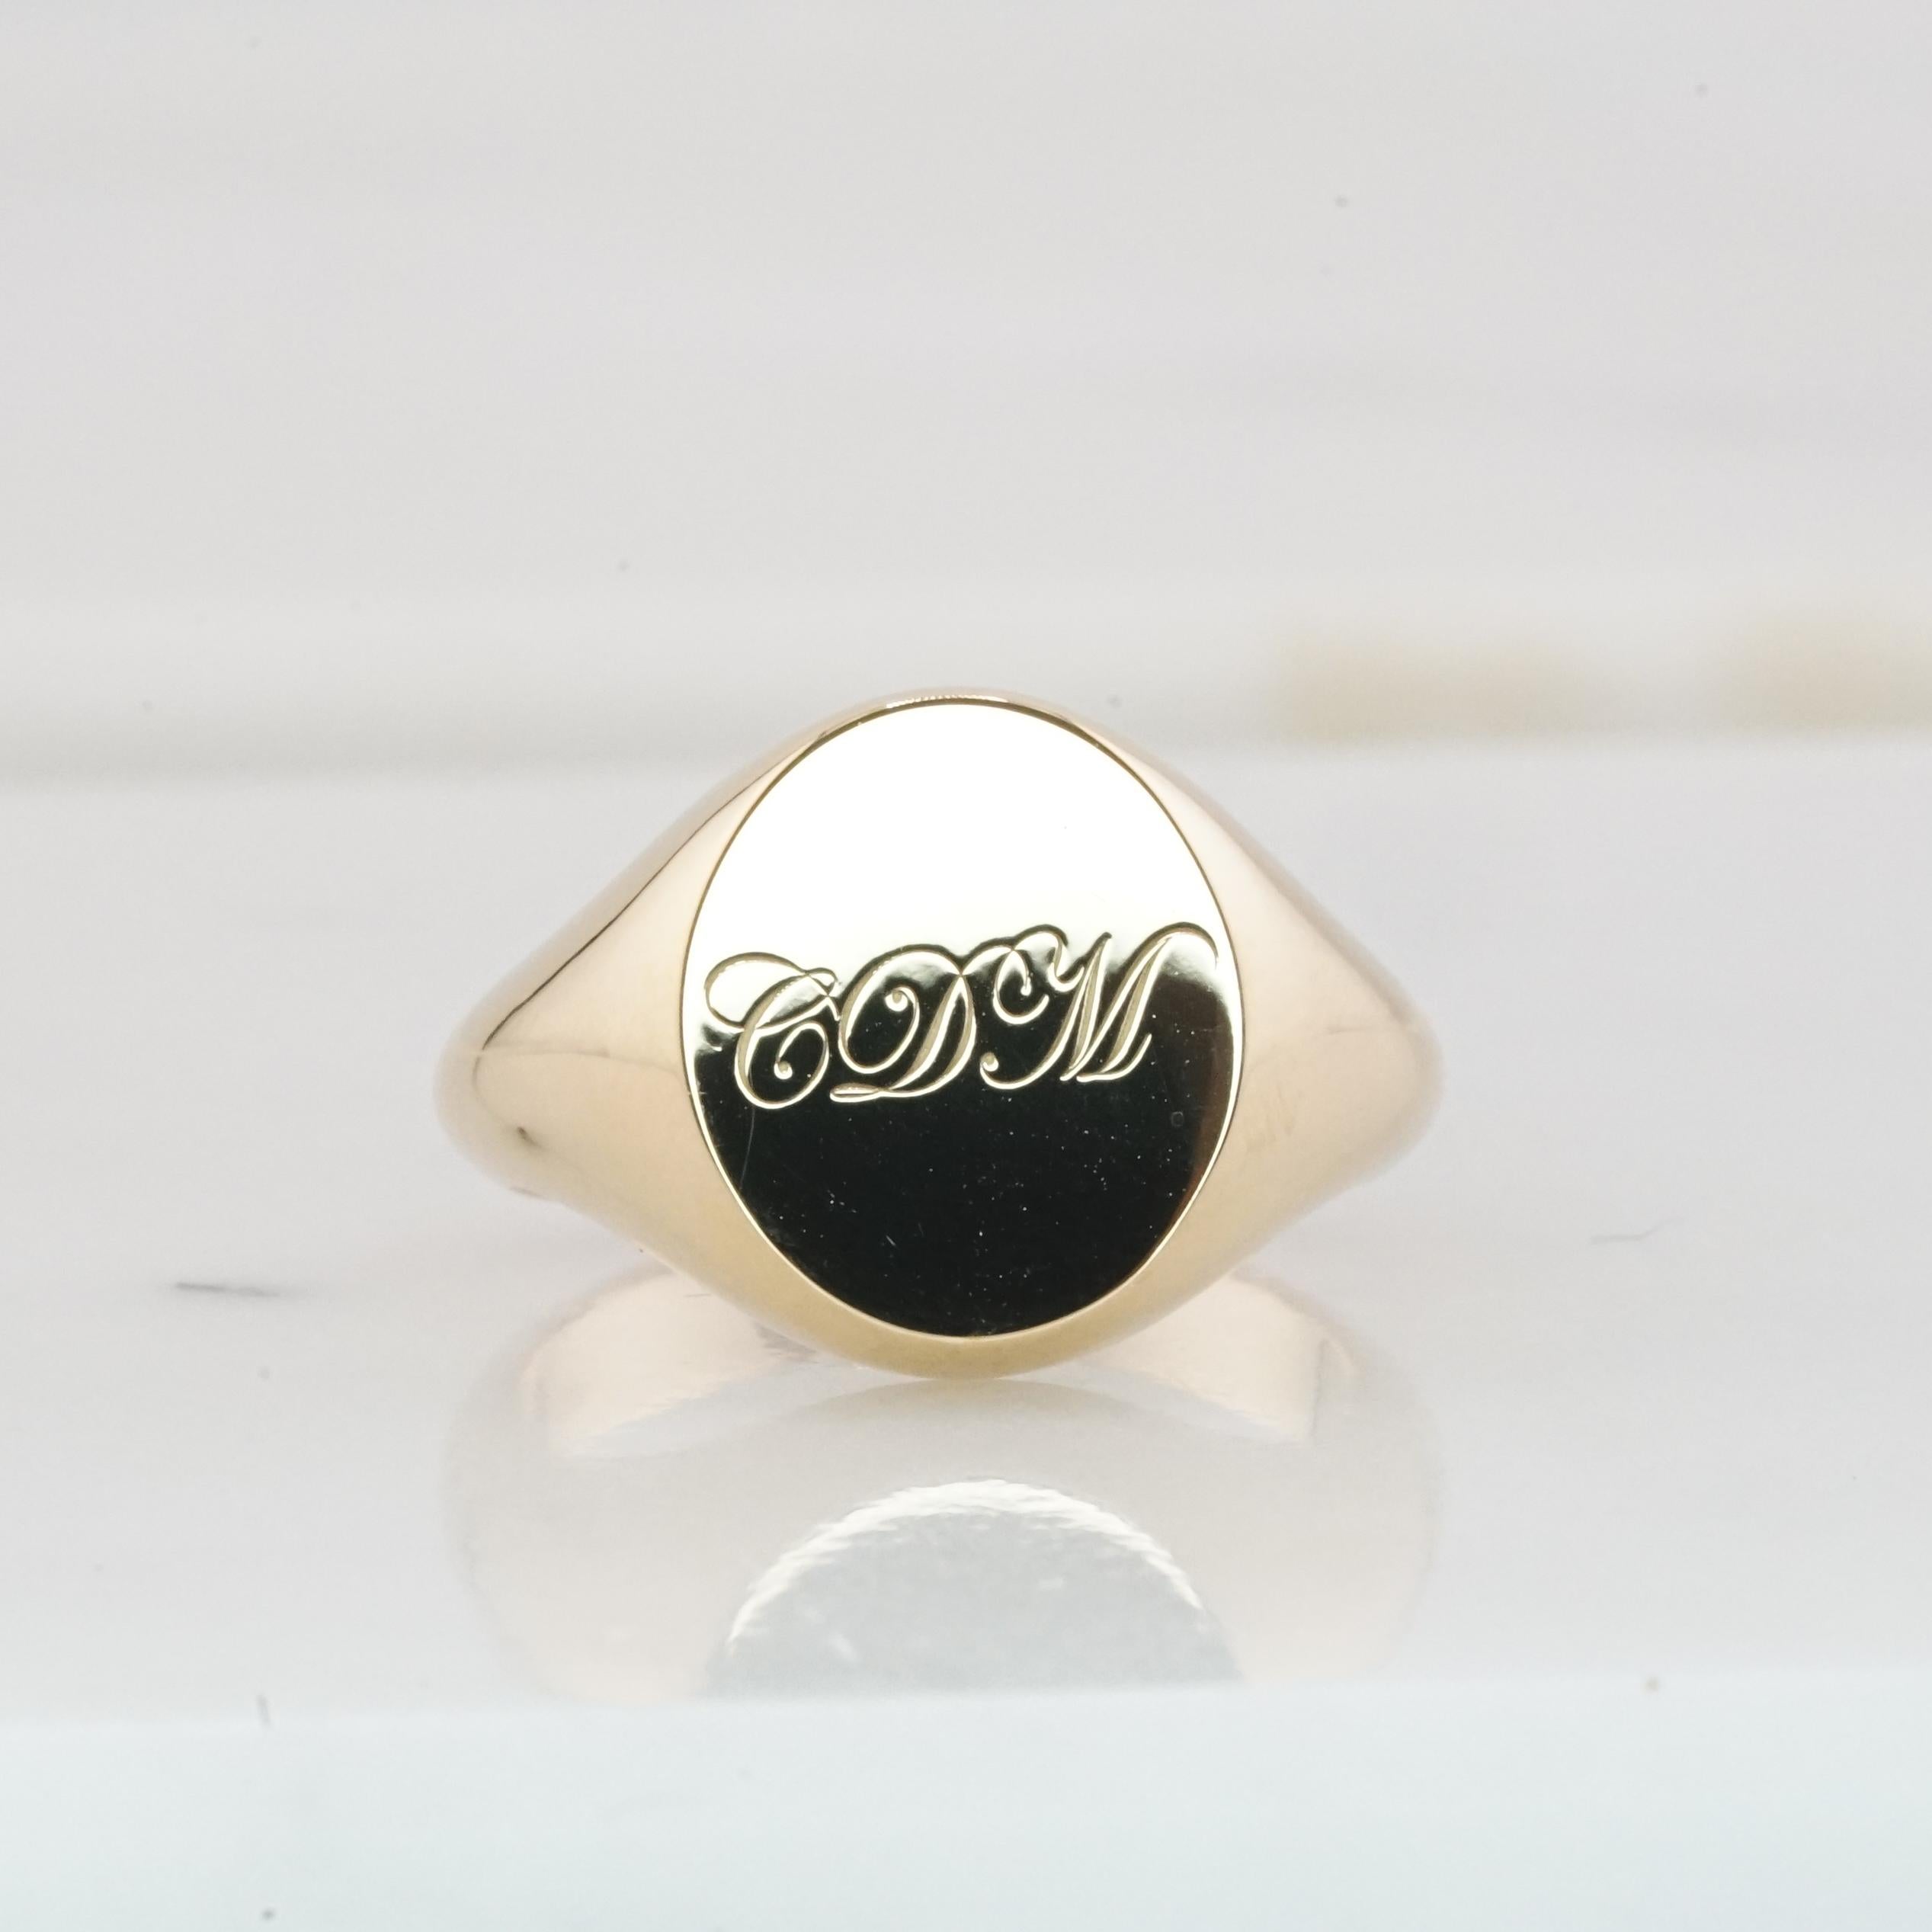 This custom Chevalier ring stands as a noble emblem, exquisitely crafted in 18K gold. 

Drawing on the timeless elegance of heraldic traditions, its bold signet-style face offers personalization options that go beyond monograms or crests. 

The ring